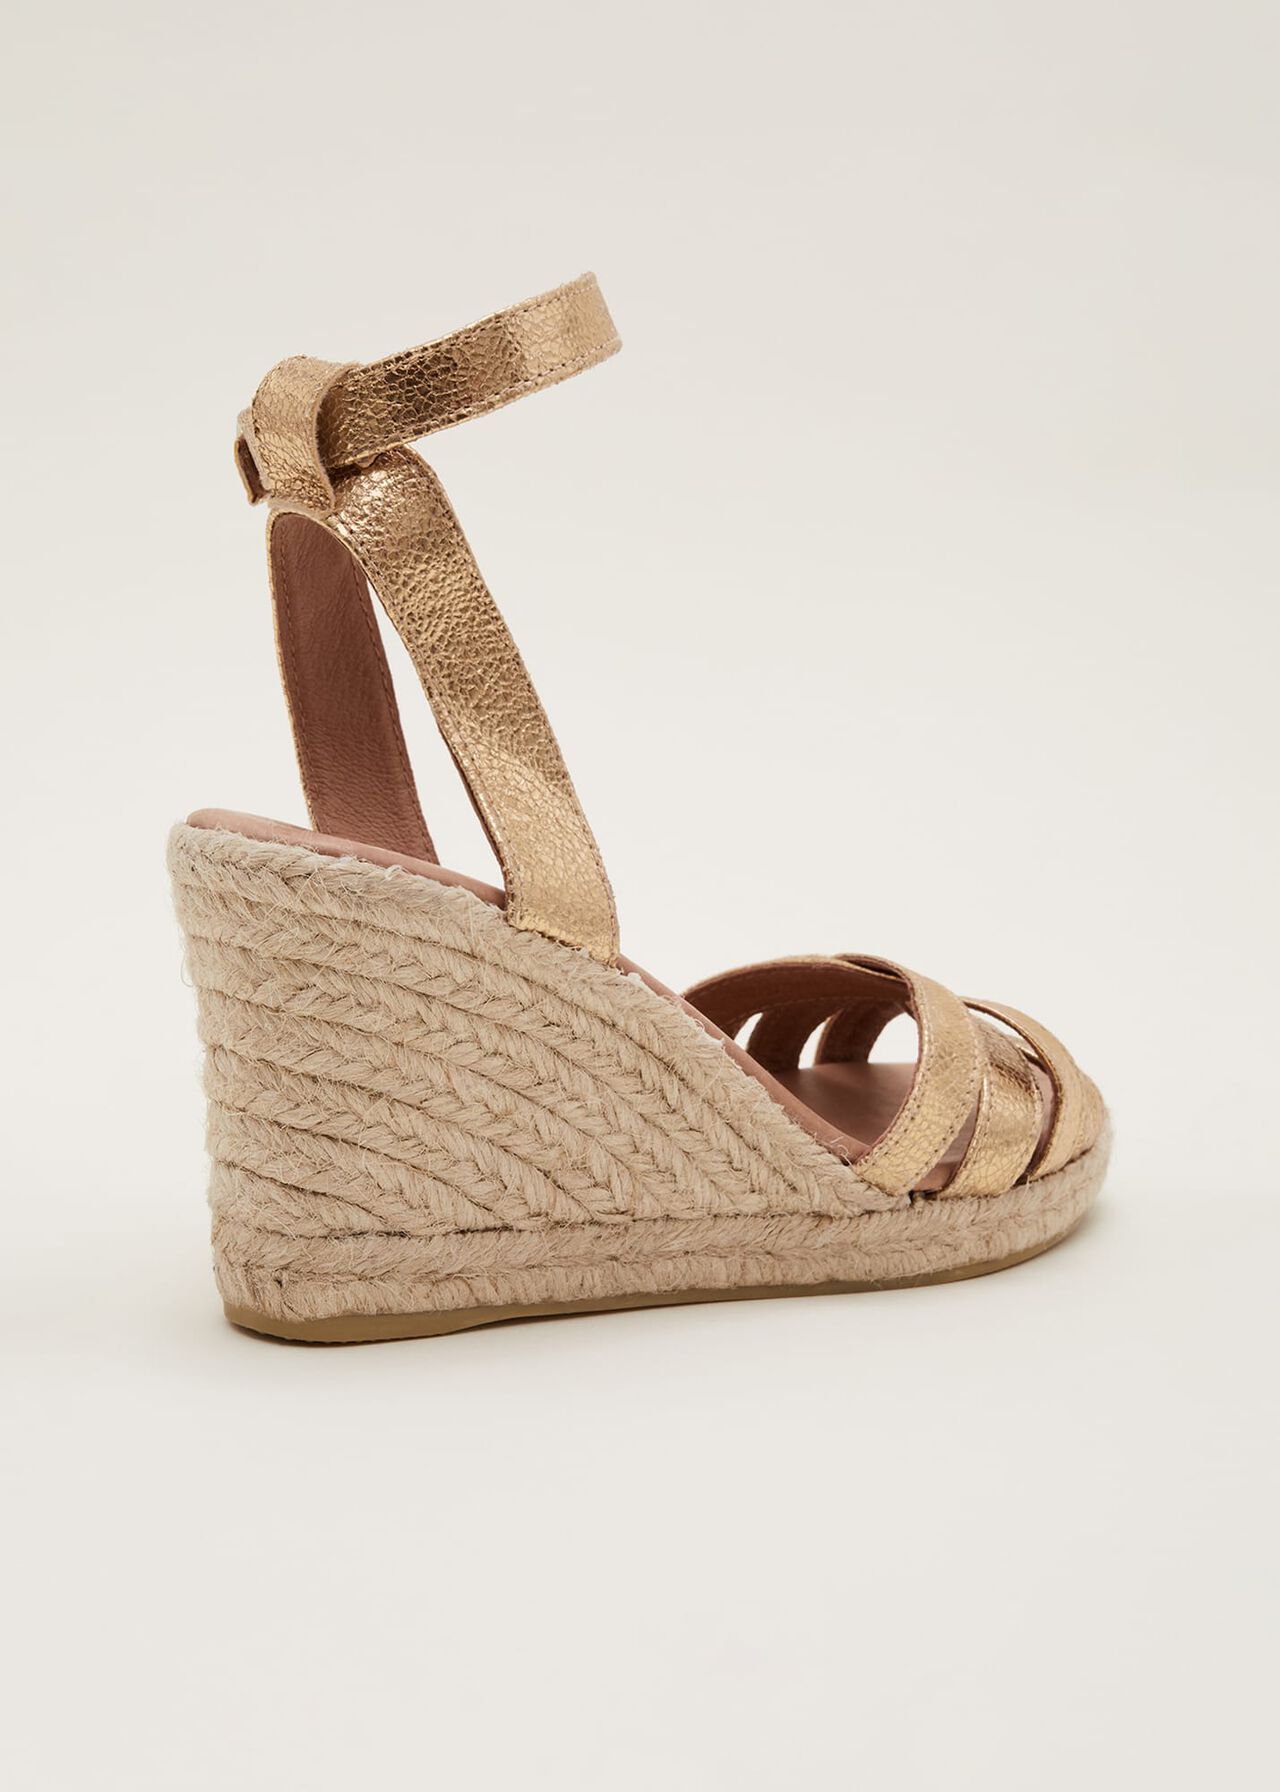 Leather Strappy Espadrille